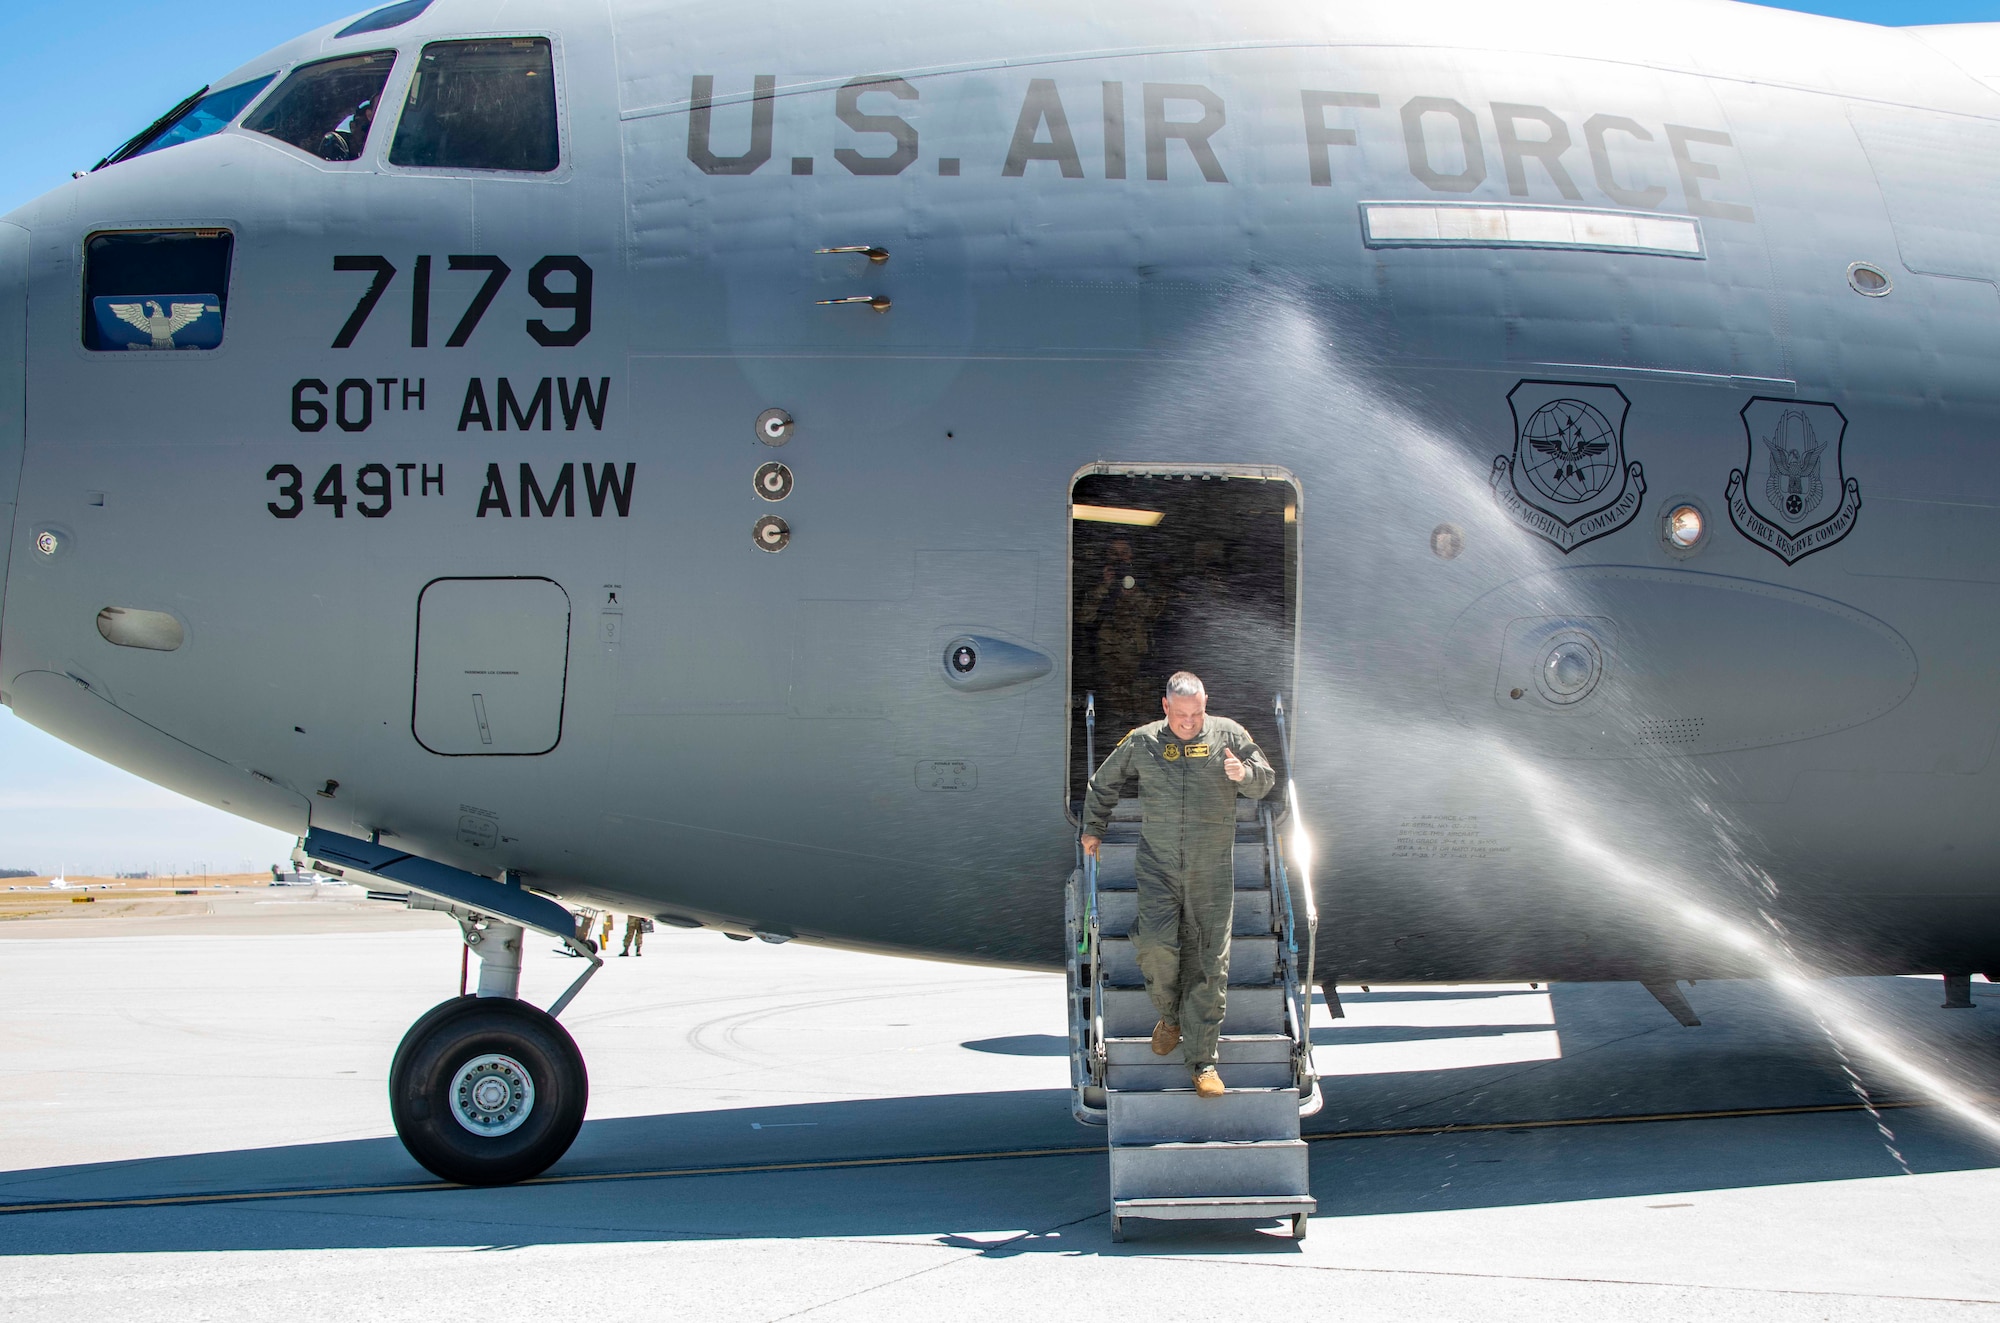 The 60th AMW commander walks down the stairs of an airplane.